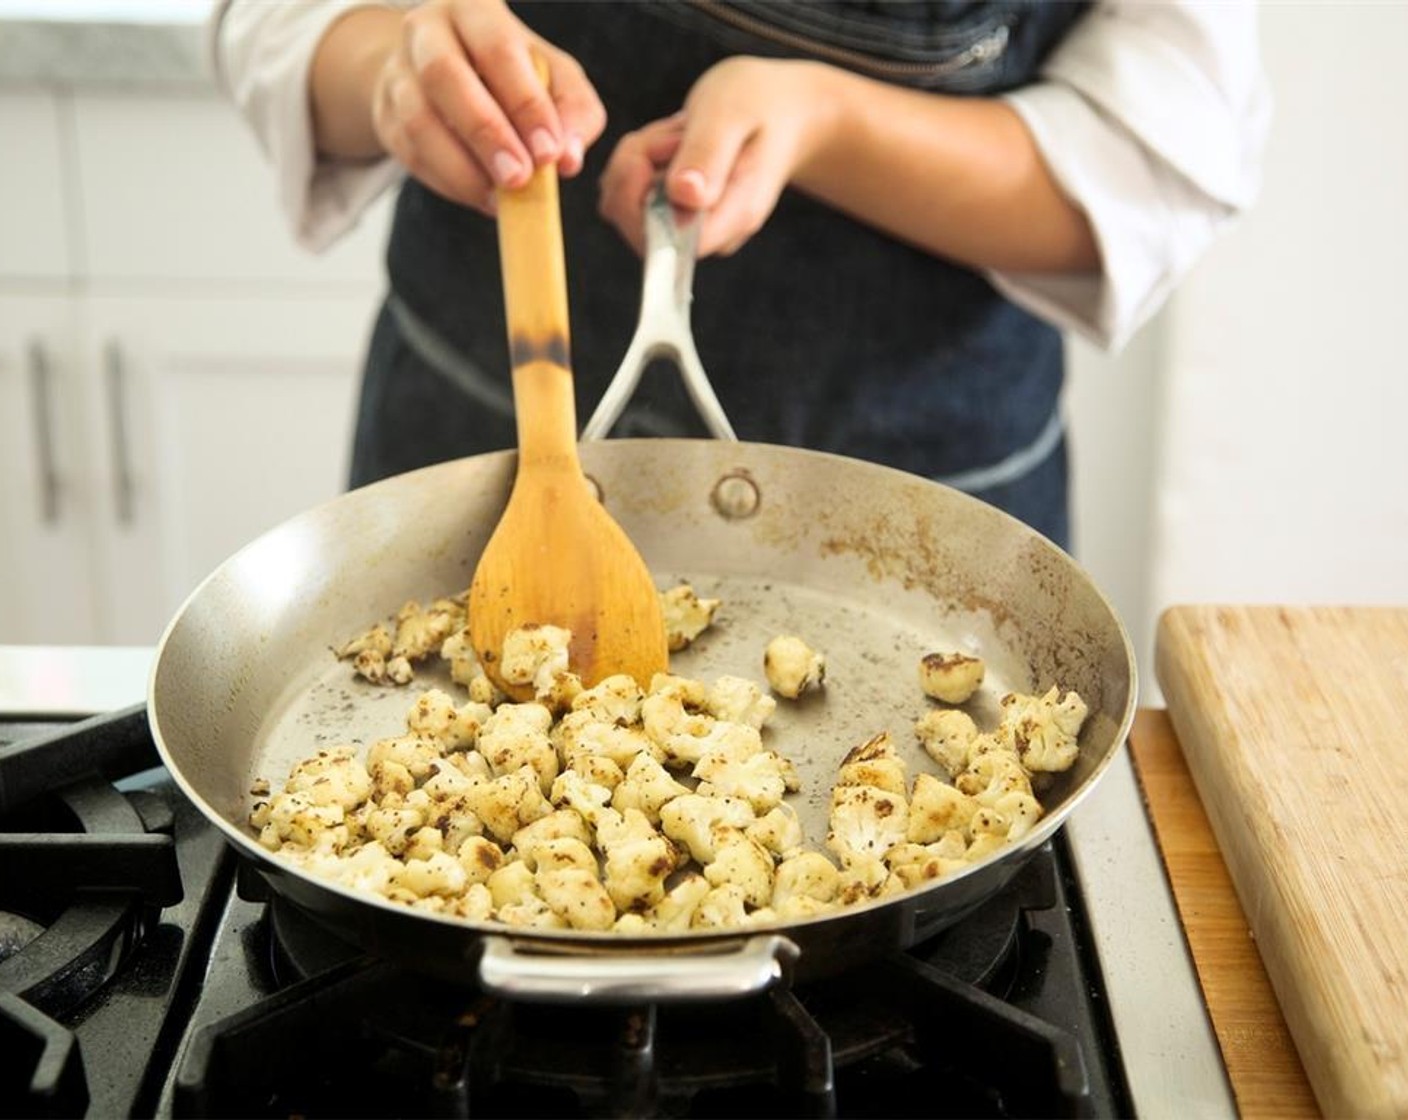 step 7 In a large saute pan, heat Olive Oil (2 Tbsp) over medium high heat. Once oil is hot, add cauliflower florets with Salt (1/2 tsp) and Ground Black Pepper (1/4 tsp). Cook for approximately seven minutes, until cauliflower is golden brown.